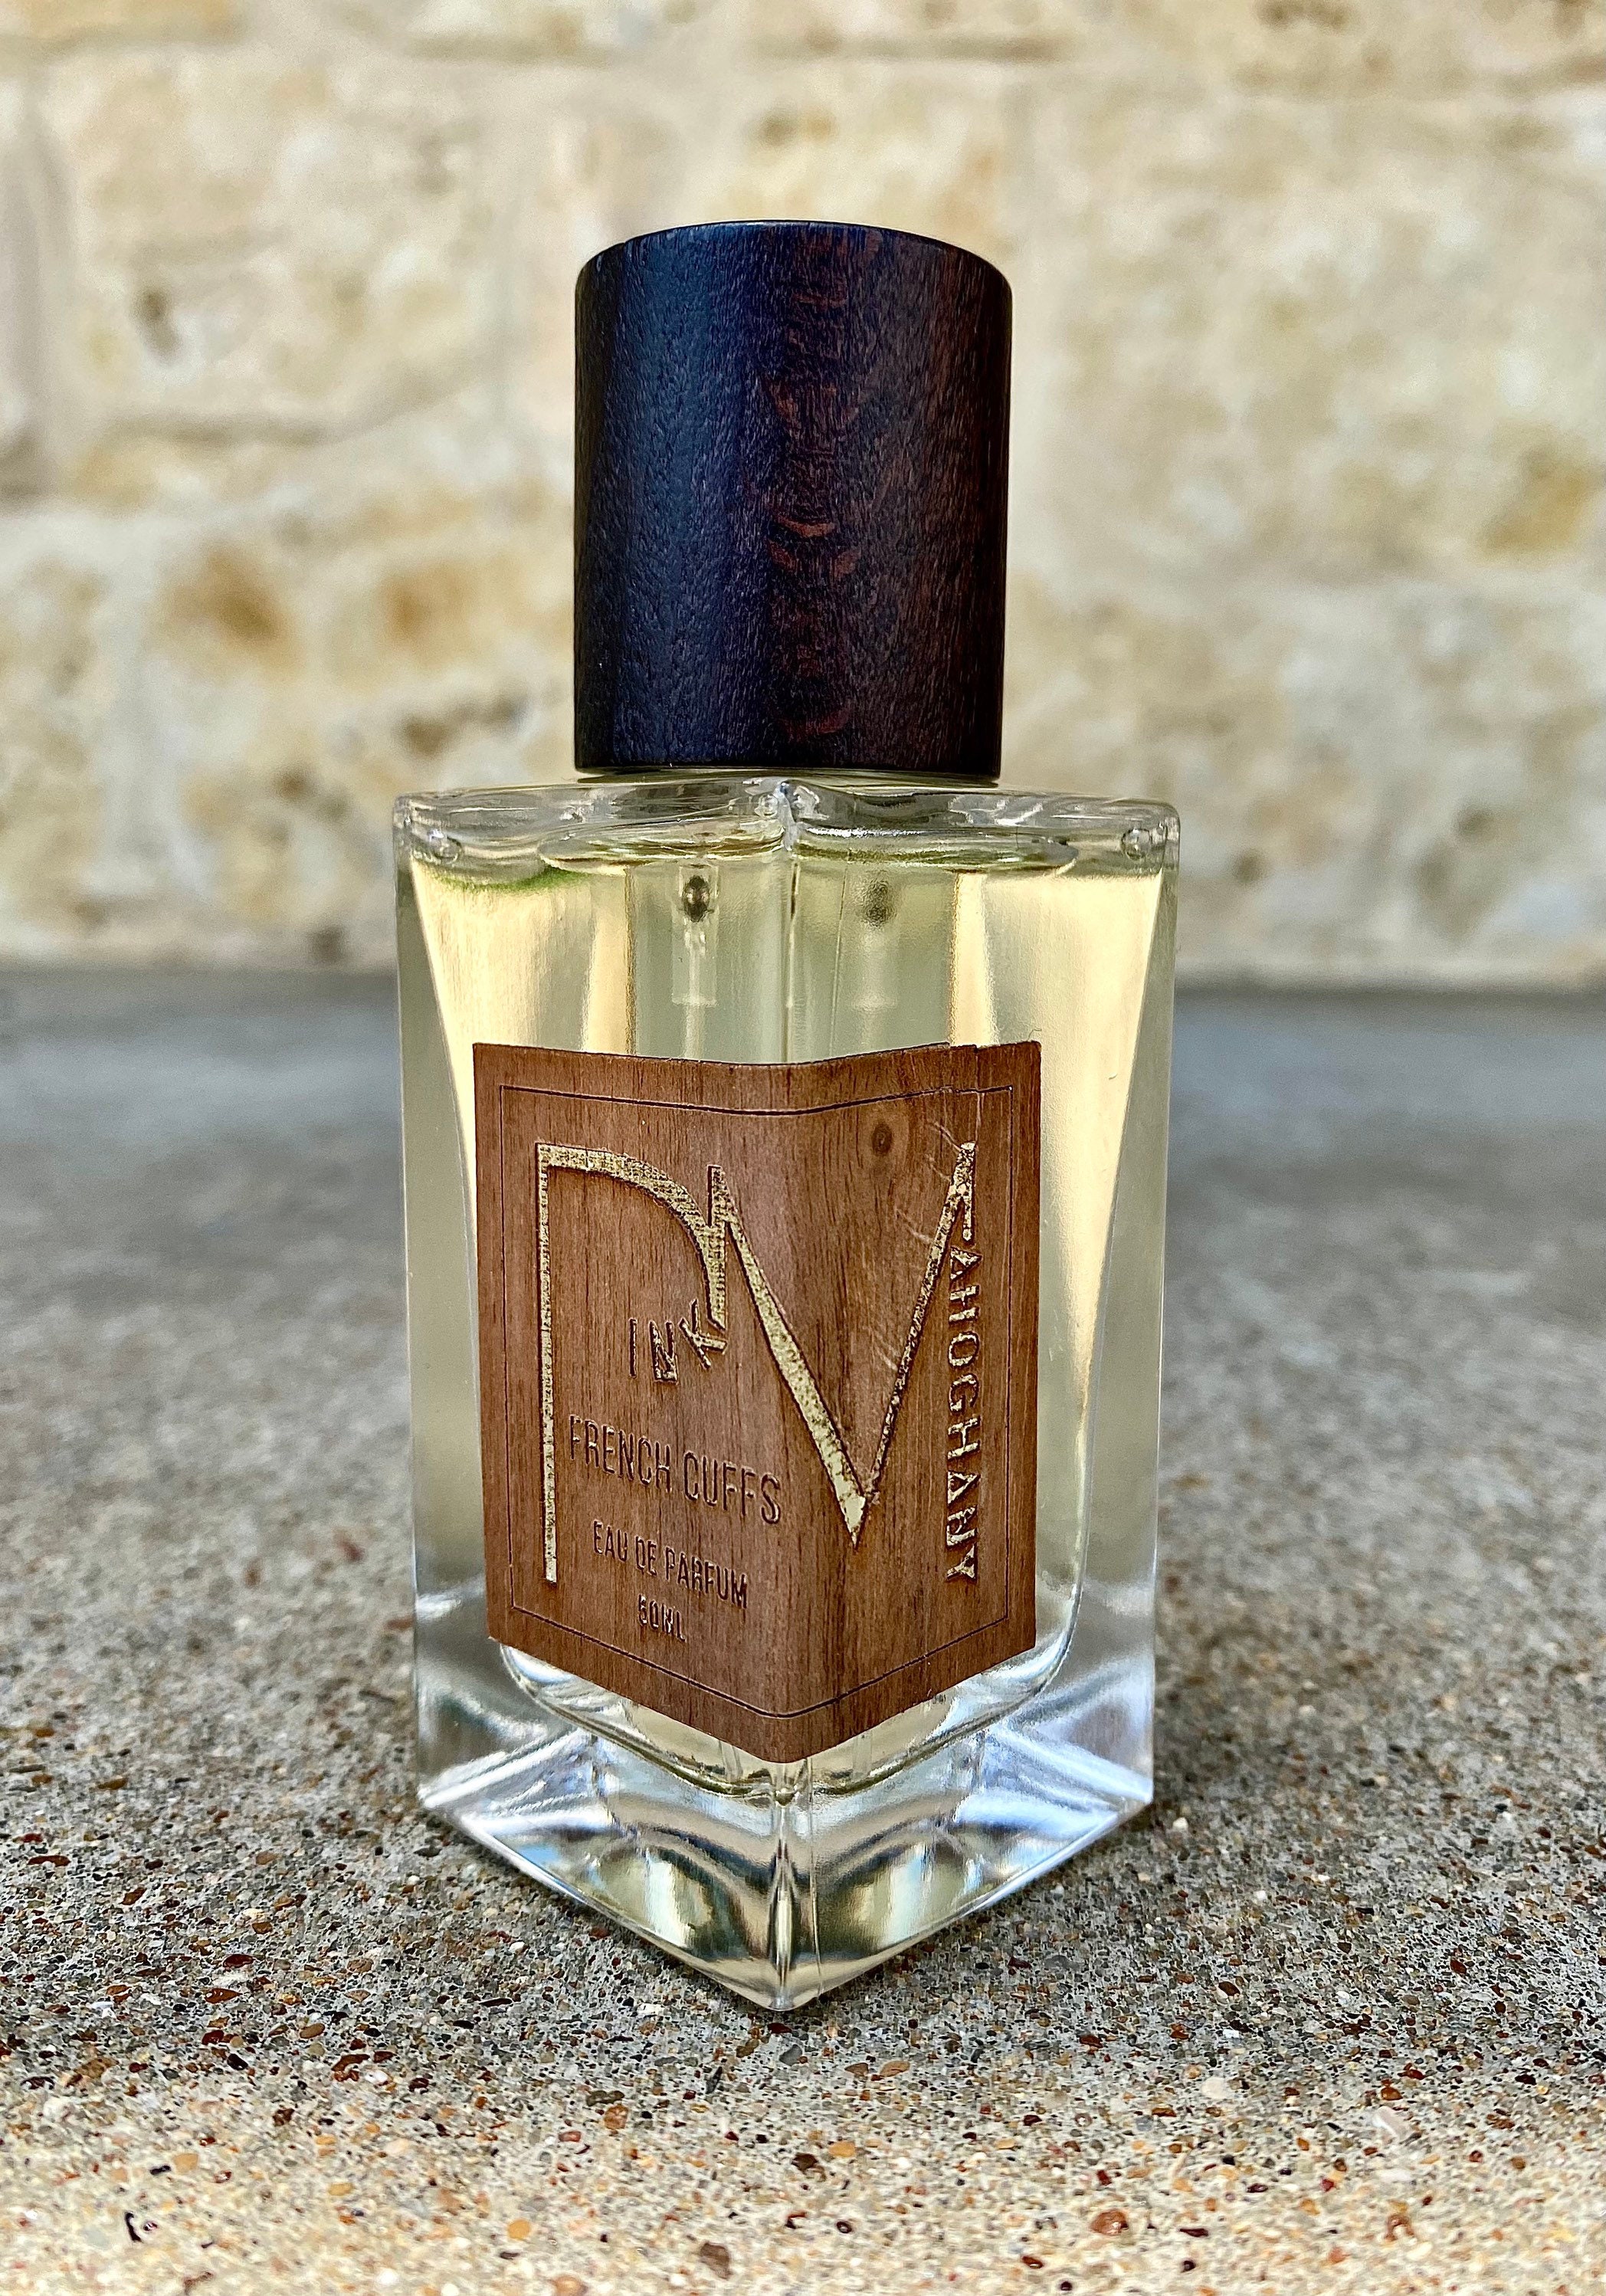 50ml French Cuffs Perfume for Men: Smoky. Woody. Resinous. 